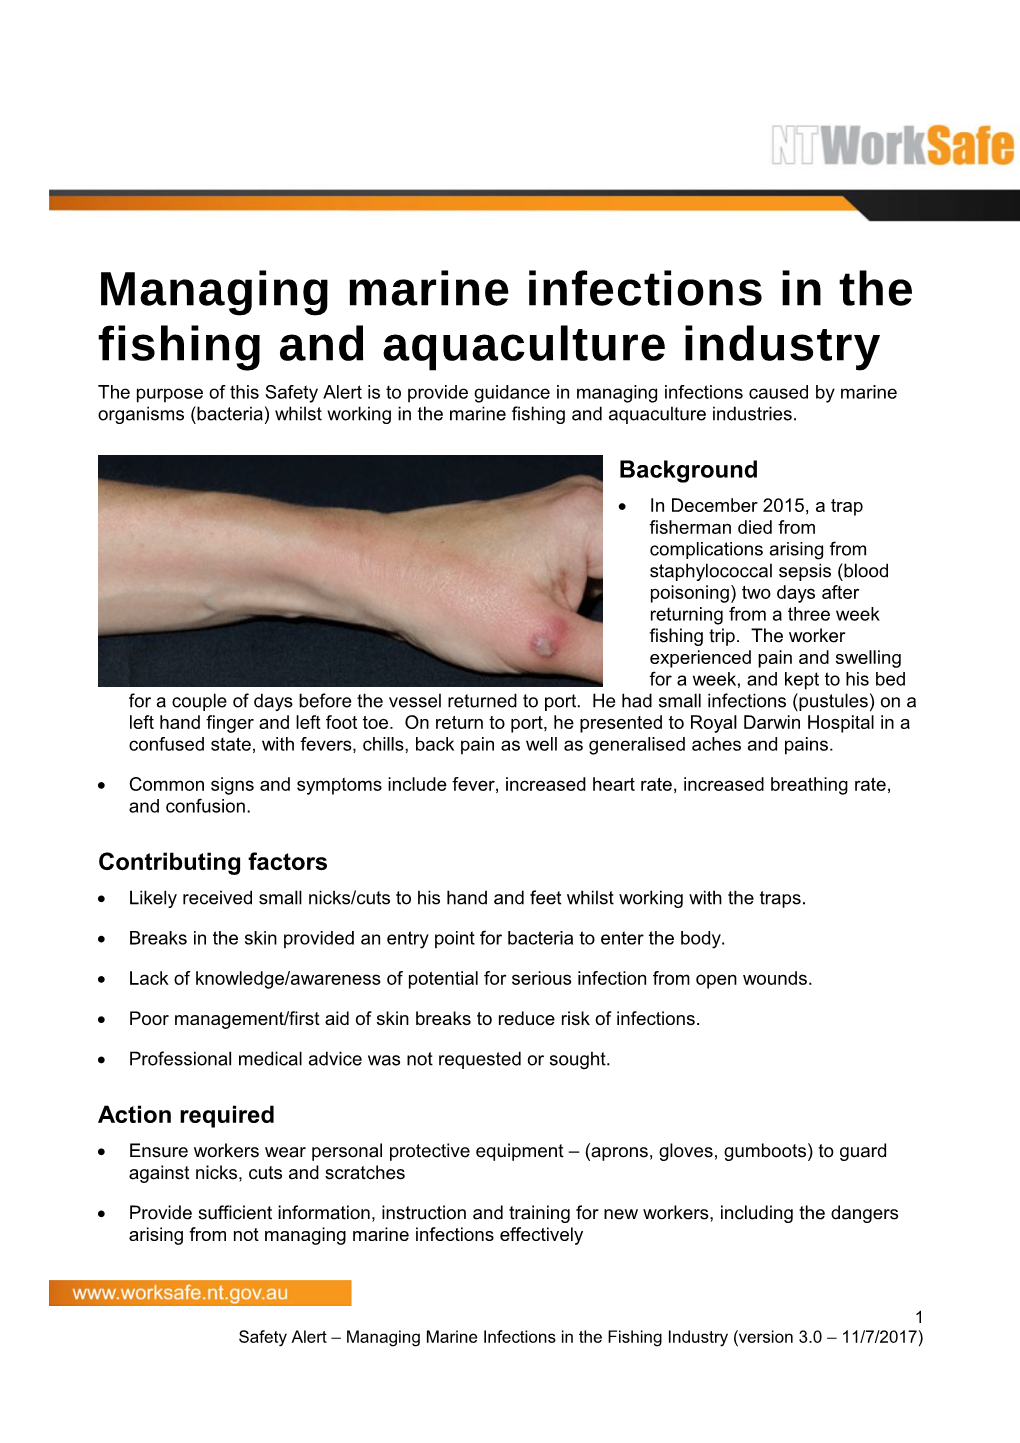 Safety Alert - Managing Marine Infections